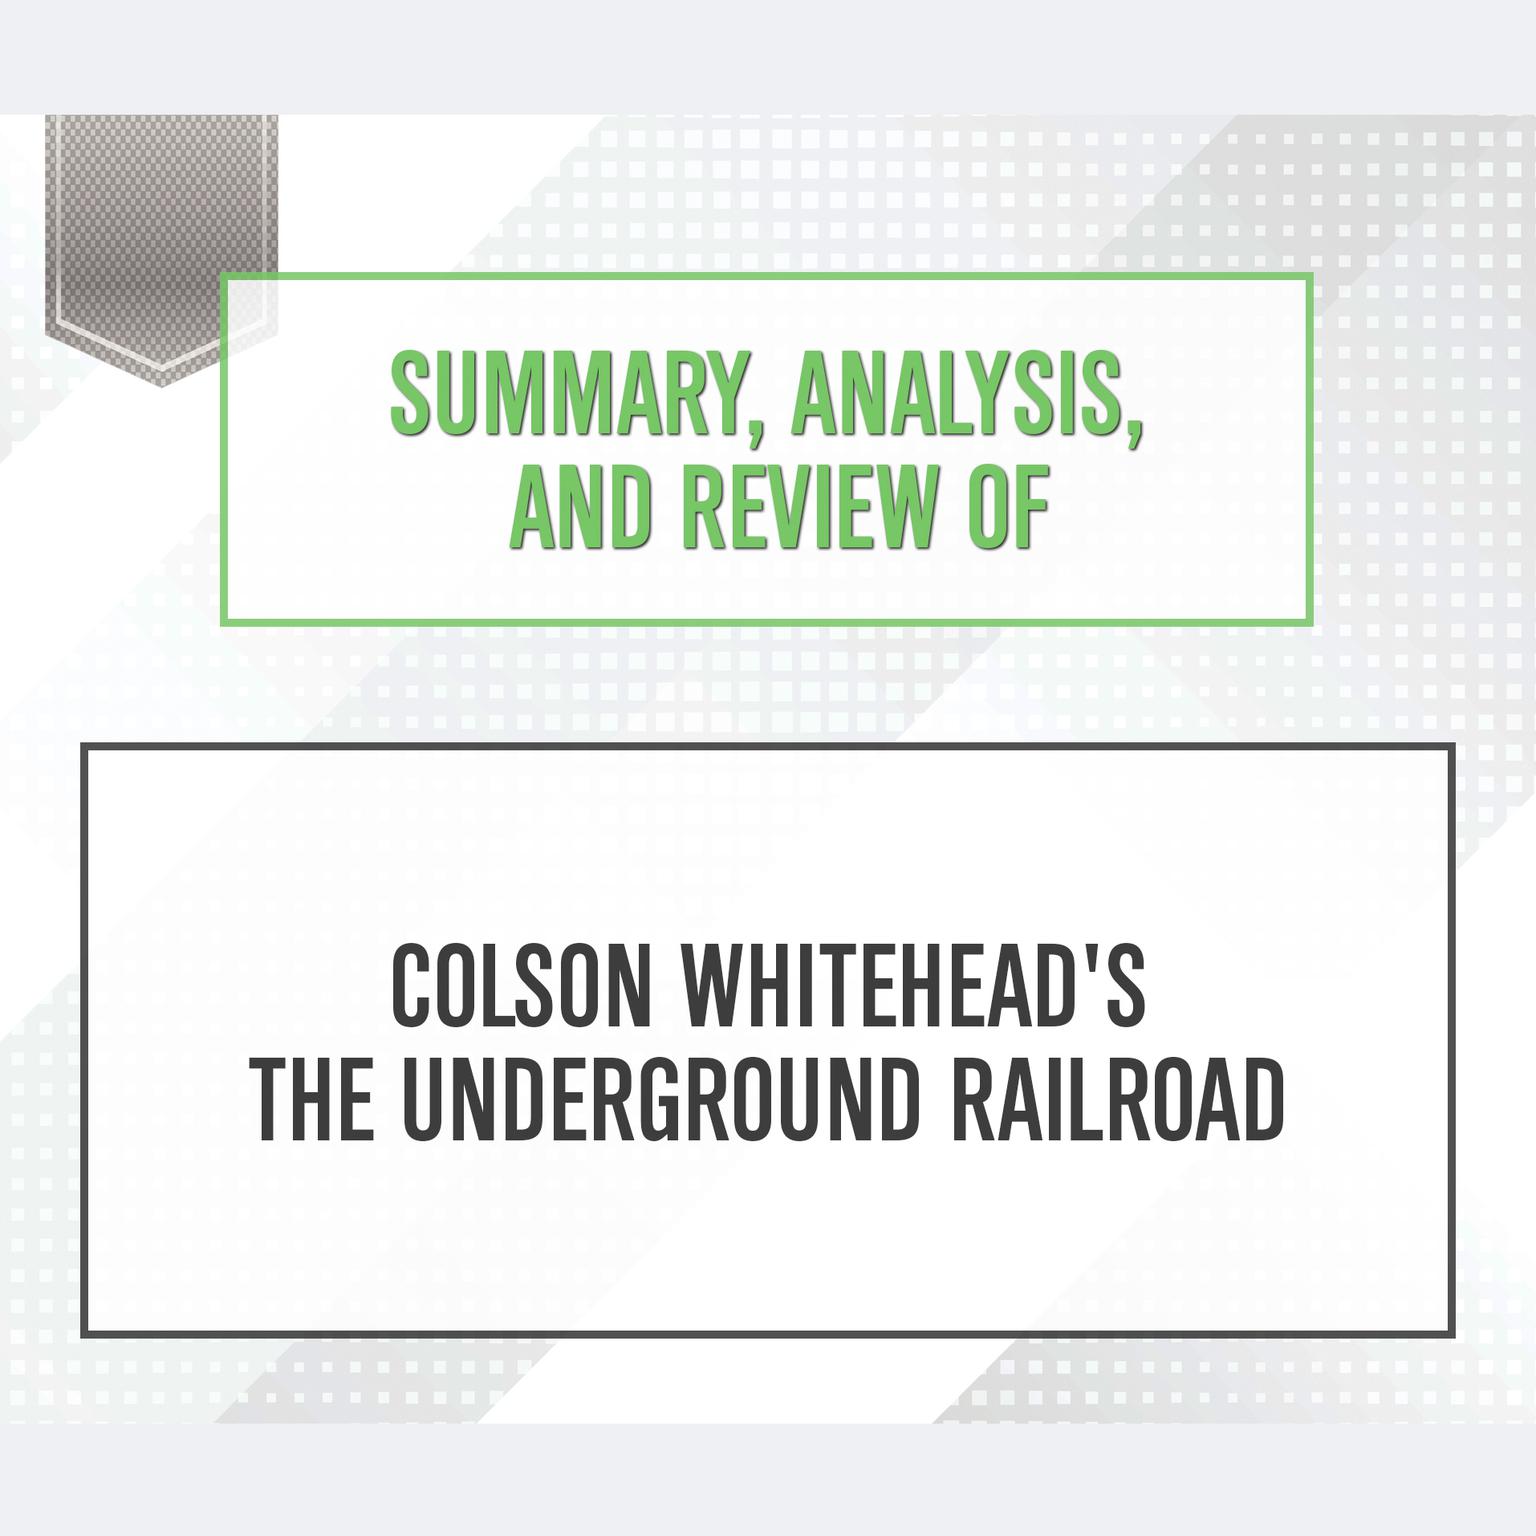 Summary, Analysis, and Review of Colson Whiteheads The Underground Railroad Audiobook, by Start Publishing Notes